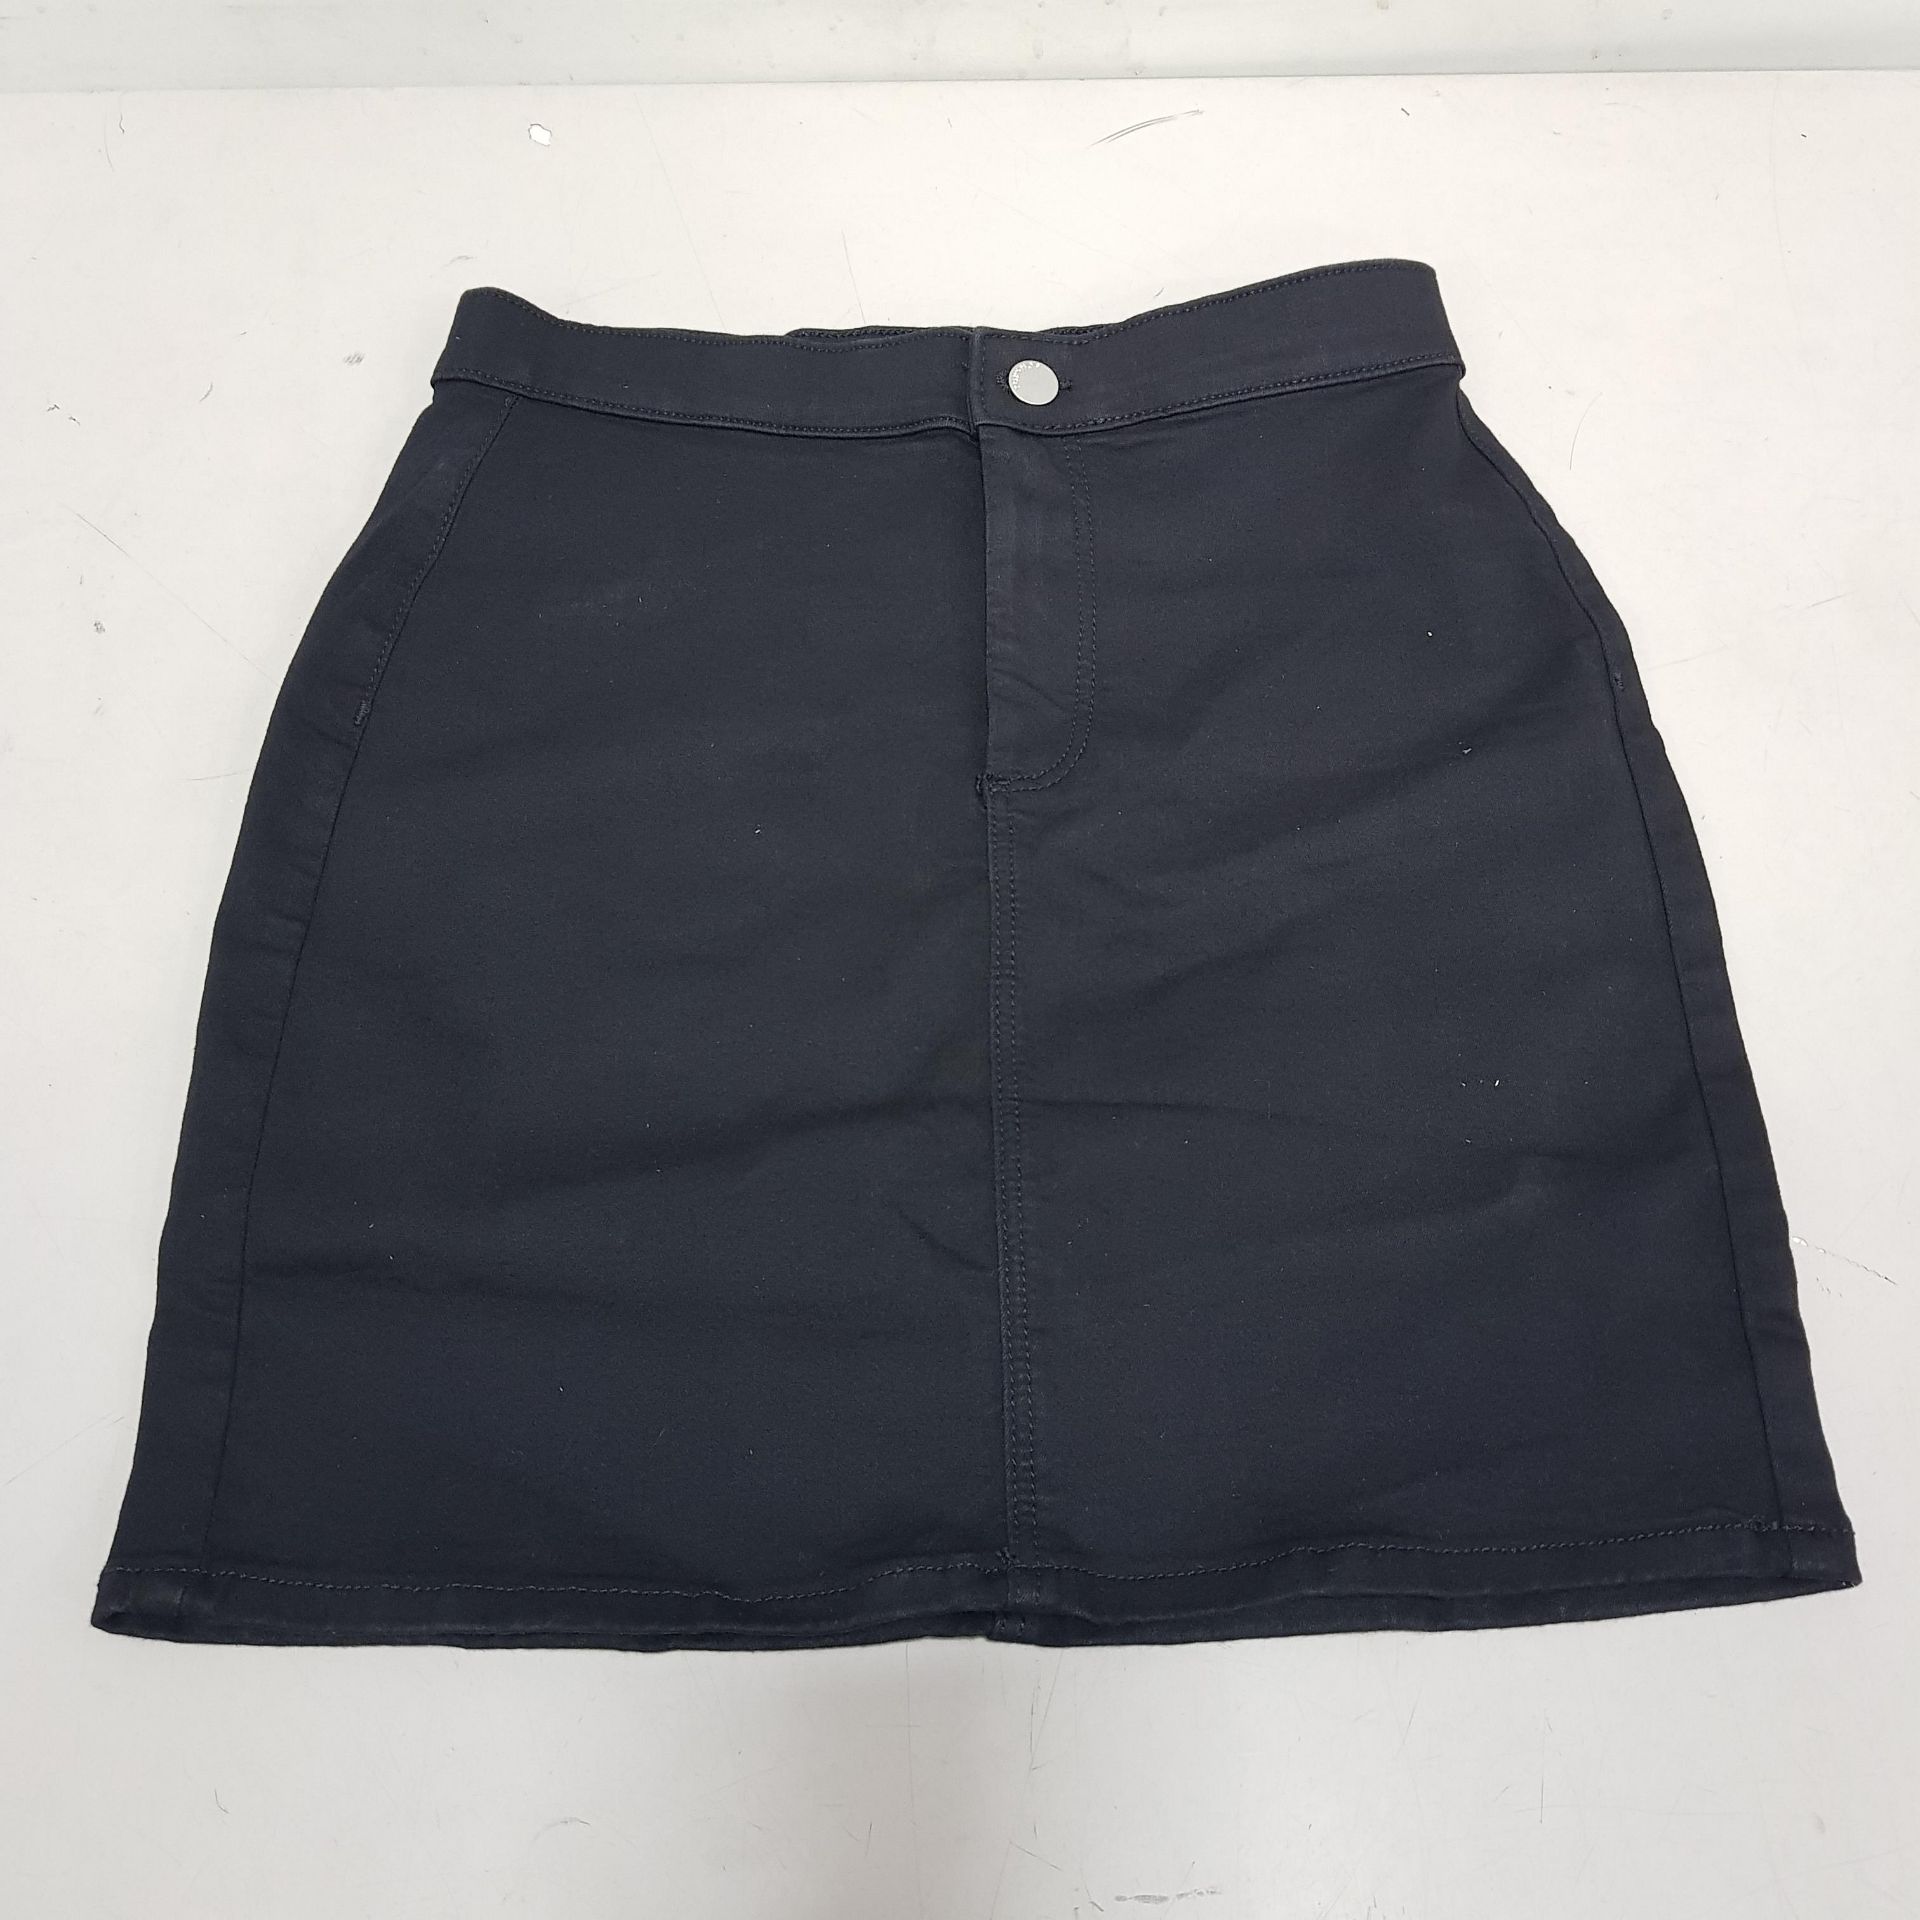 30 X BRAND NEW TOPSHOP BLACK DENIM SKIRTS IN SIZE UK 6, 12 AND 16 RRP-£25.00PP TOTAL RRP-£750.00